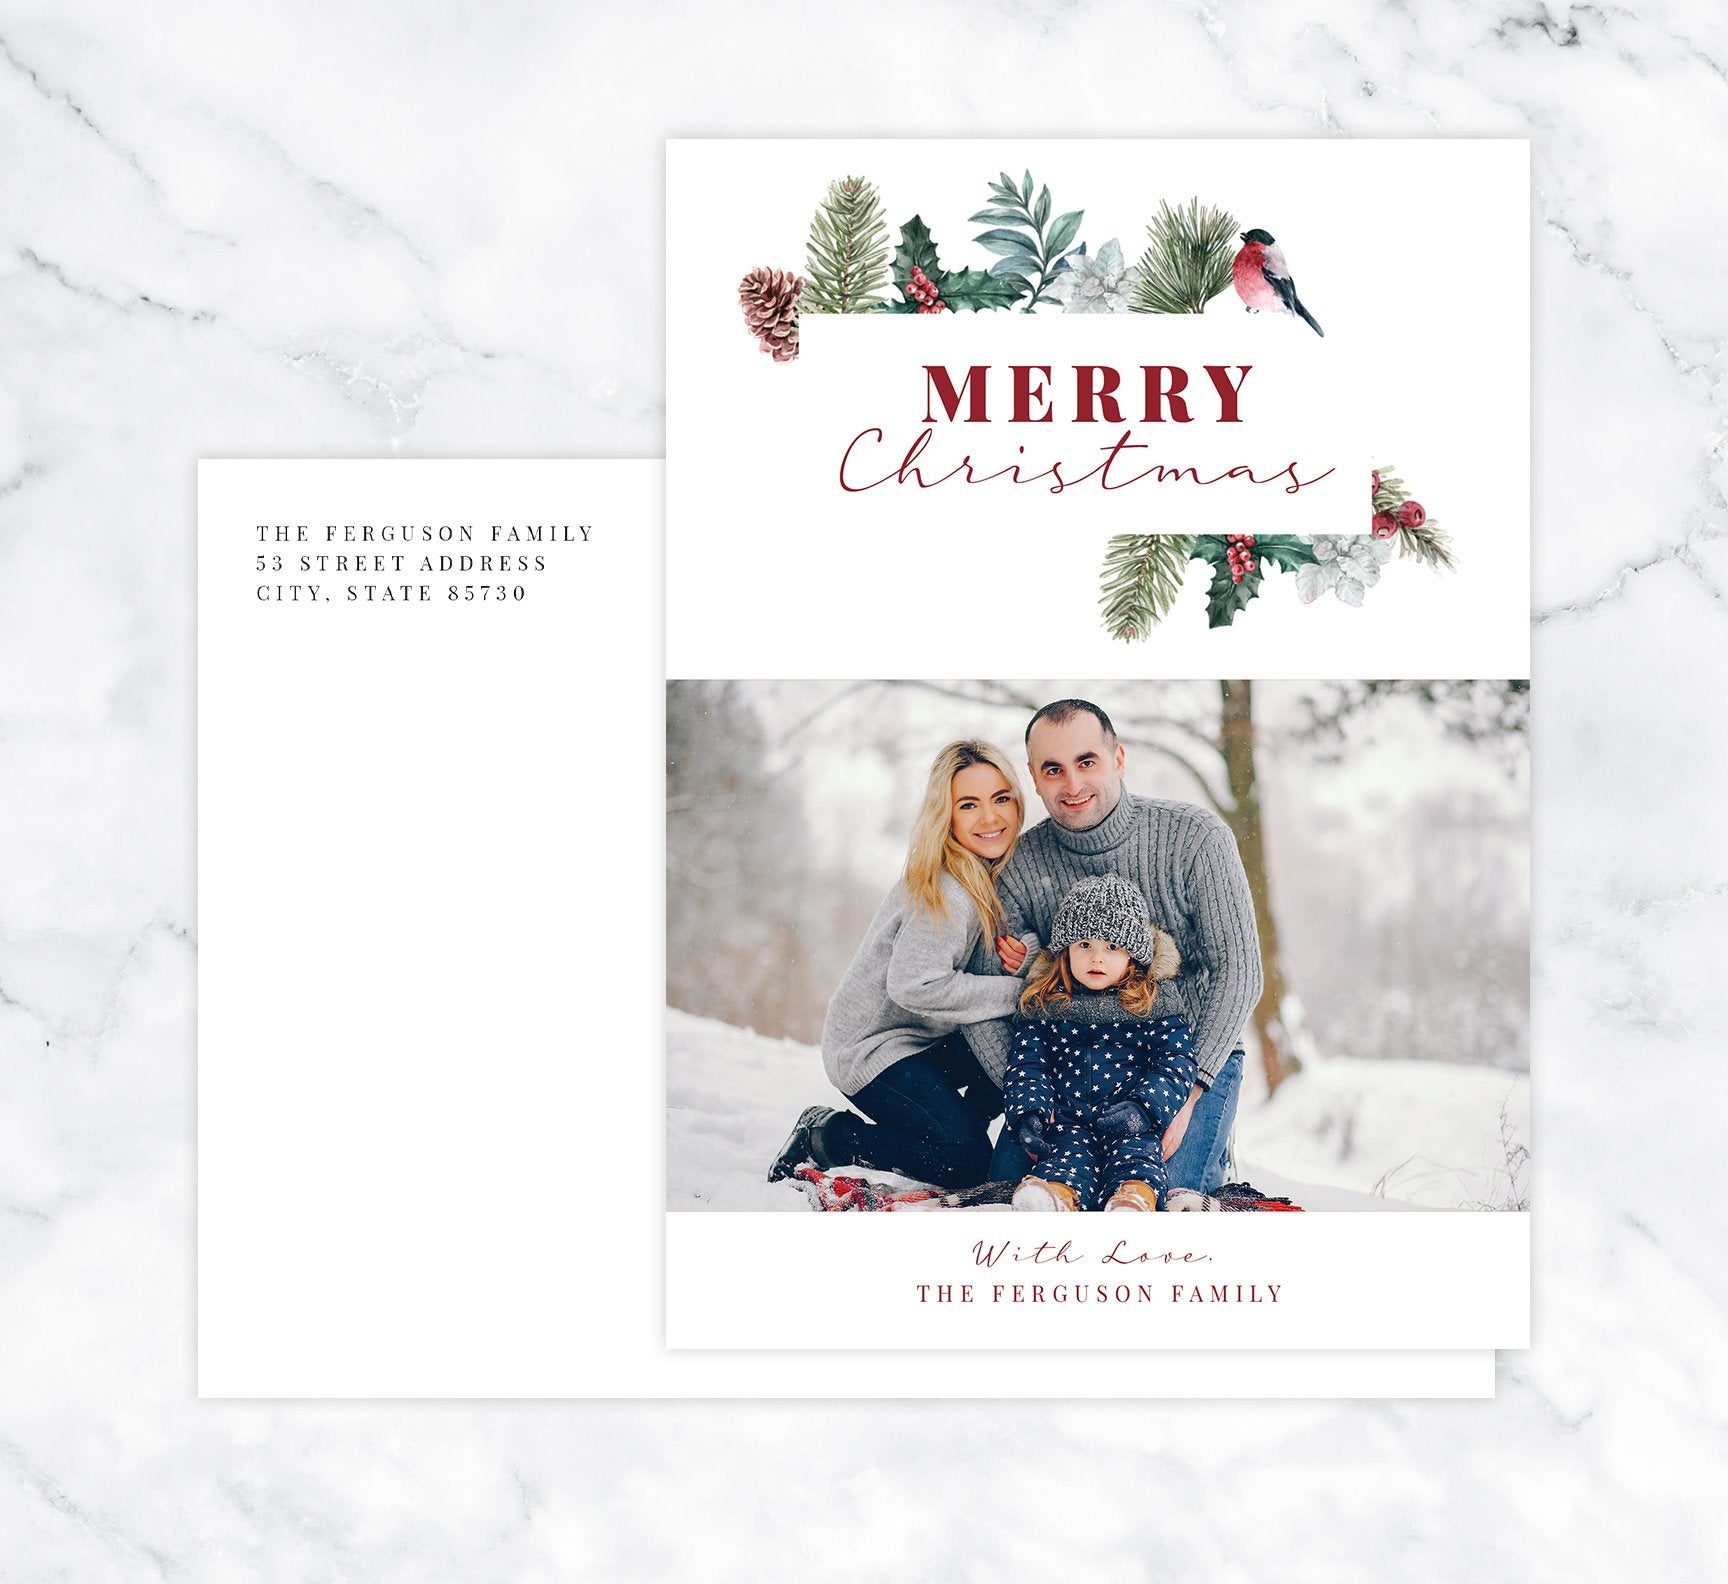 Christmas Pine Holiday Card Mockup; Holiday card with envelope and return address printed on it. 